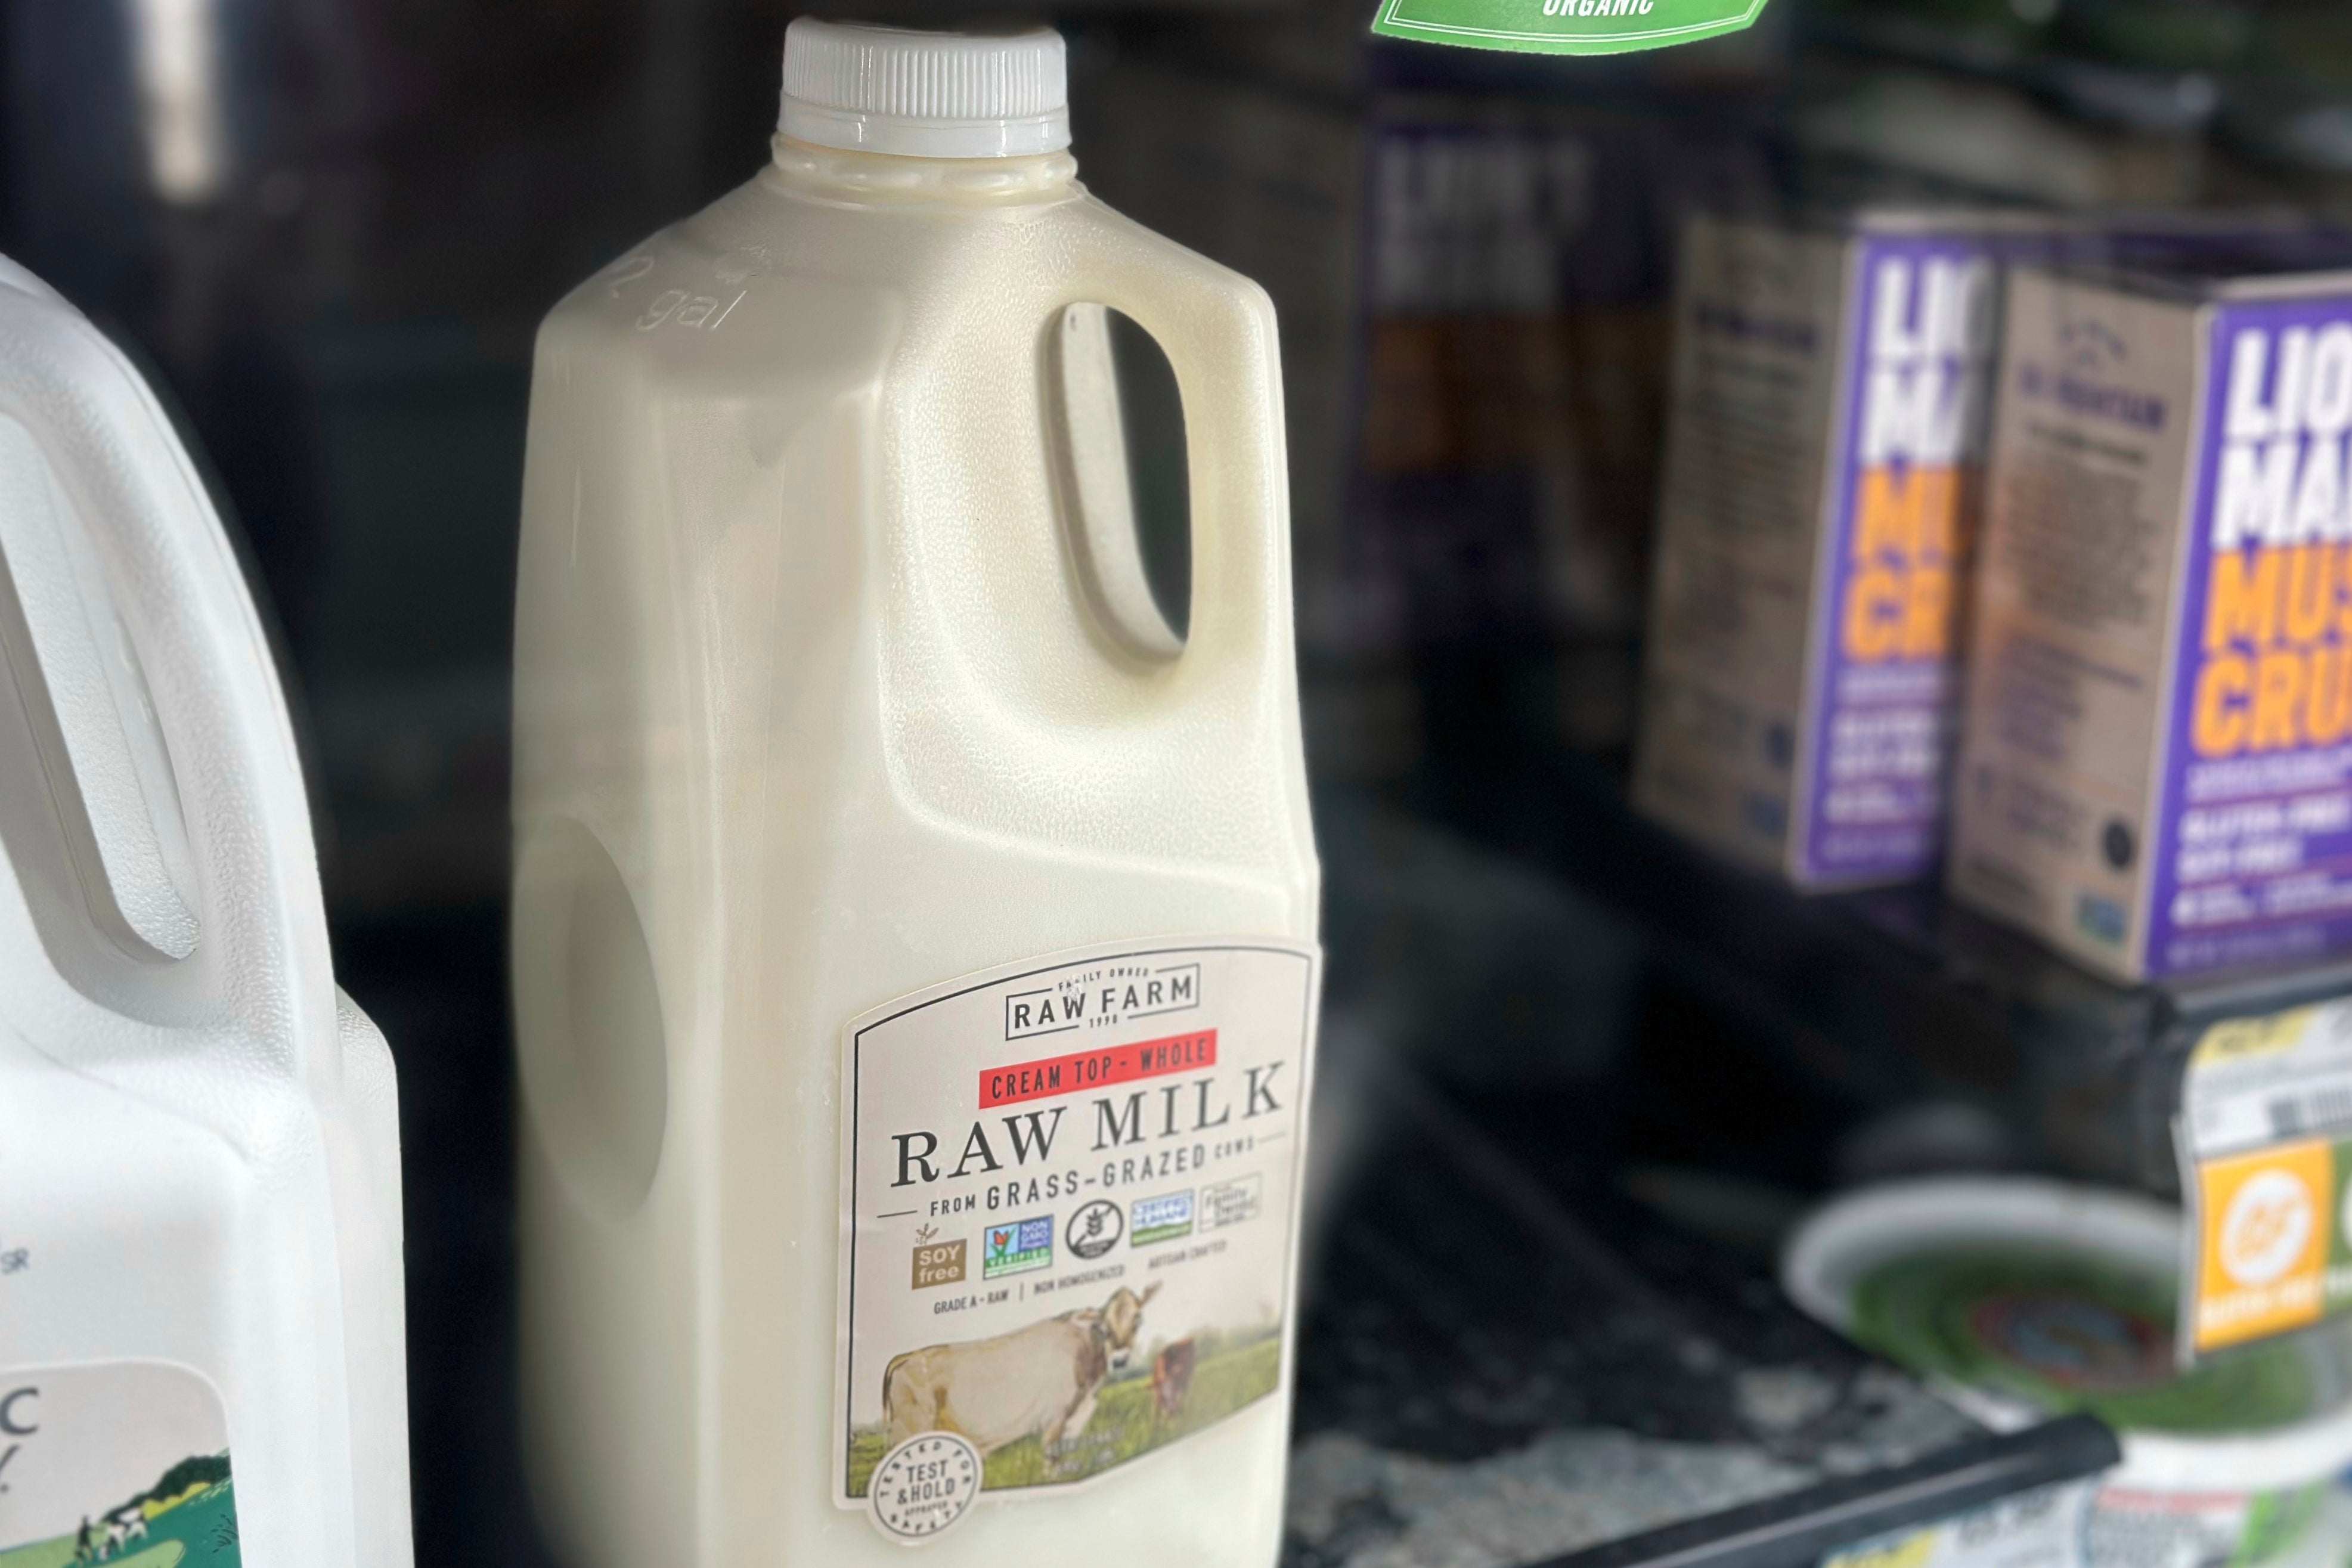 A bottle of raw milk is displayed for sale at a store in Temecula